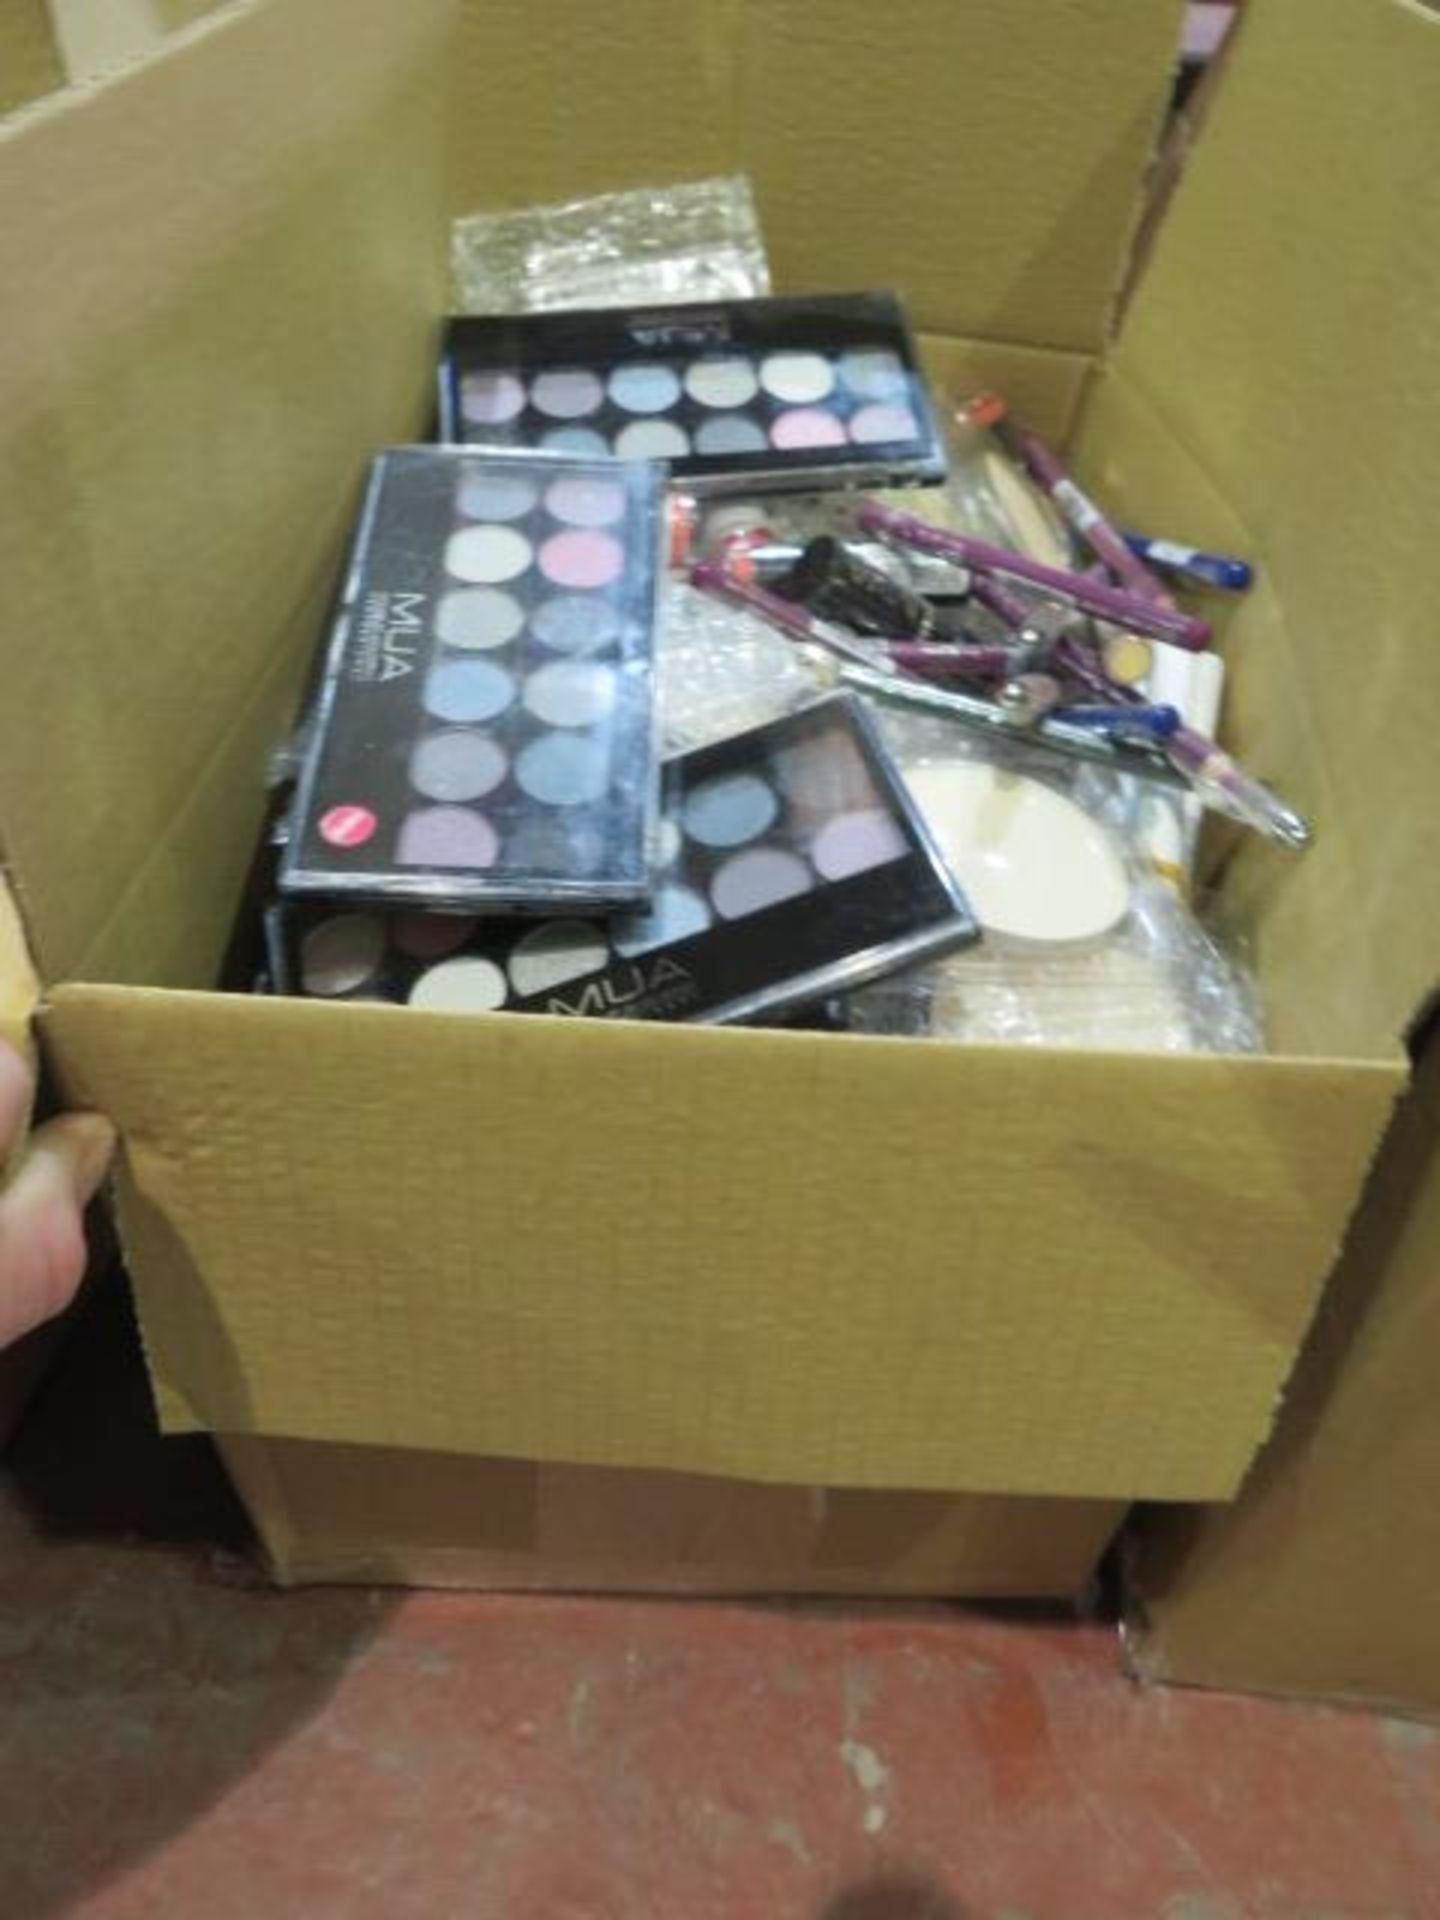 Circa. 200 items of various new make up acadamy make up to include: undress your skin radiant - Image 2 of 2